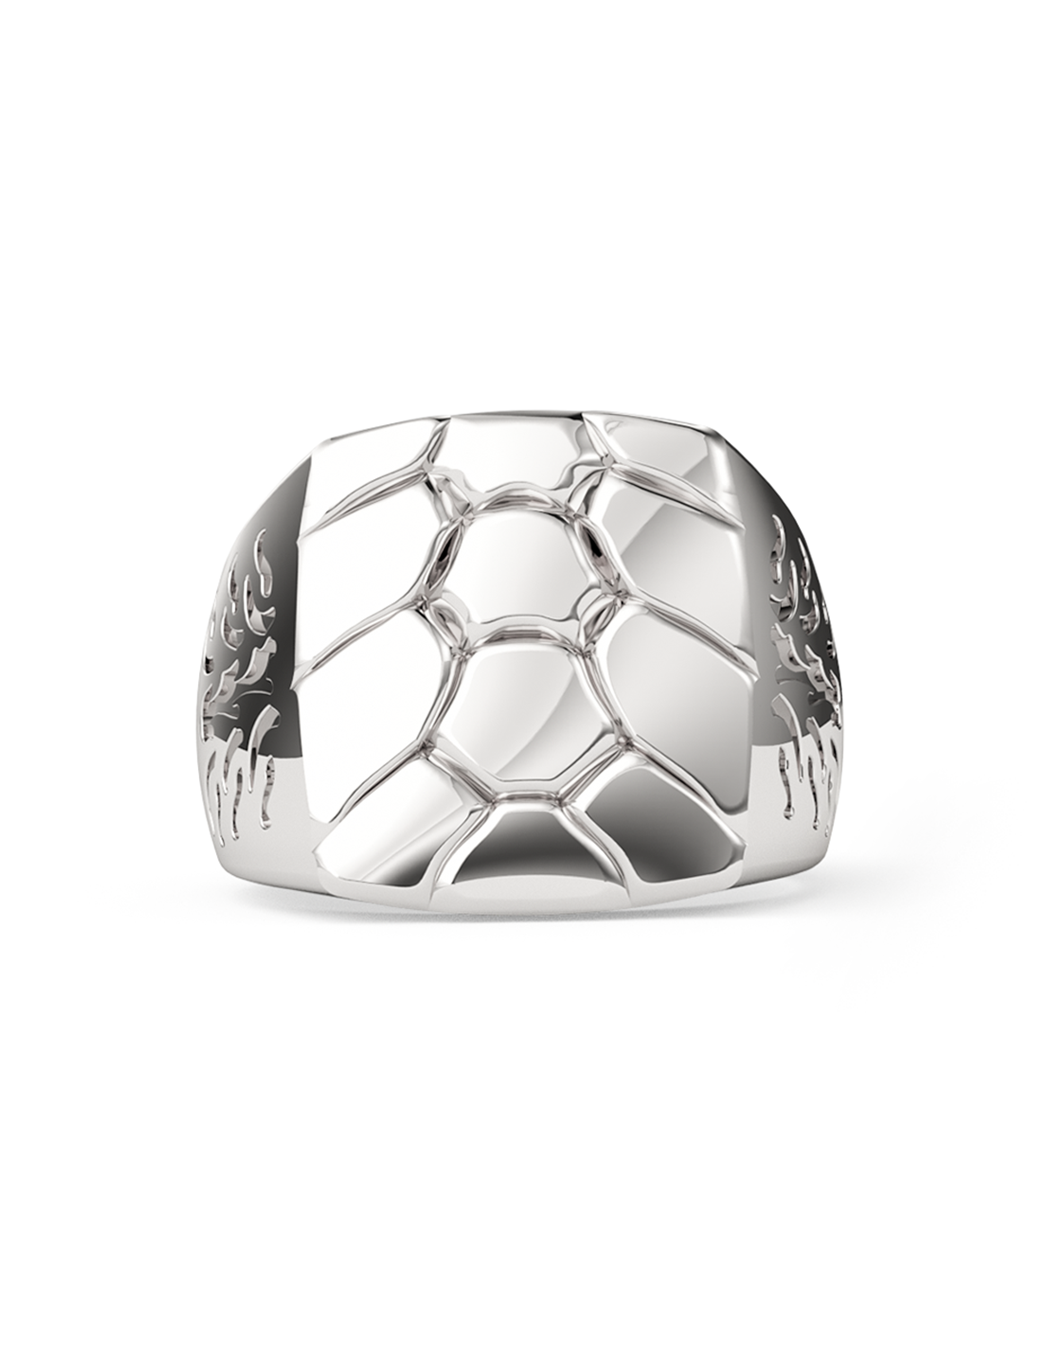 Giant turtle shell ring – Galapagos Jewelry